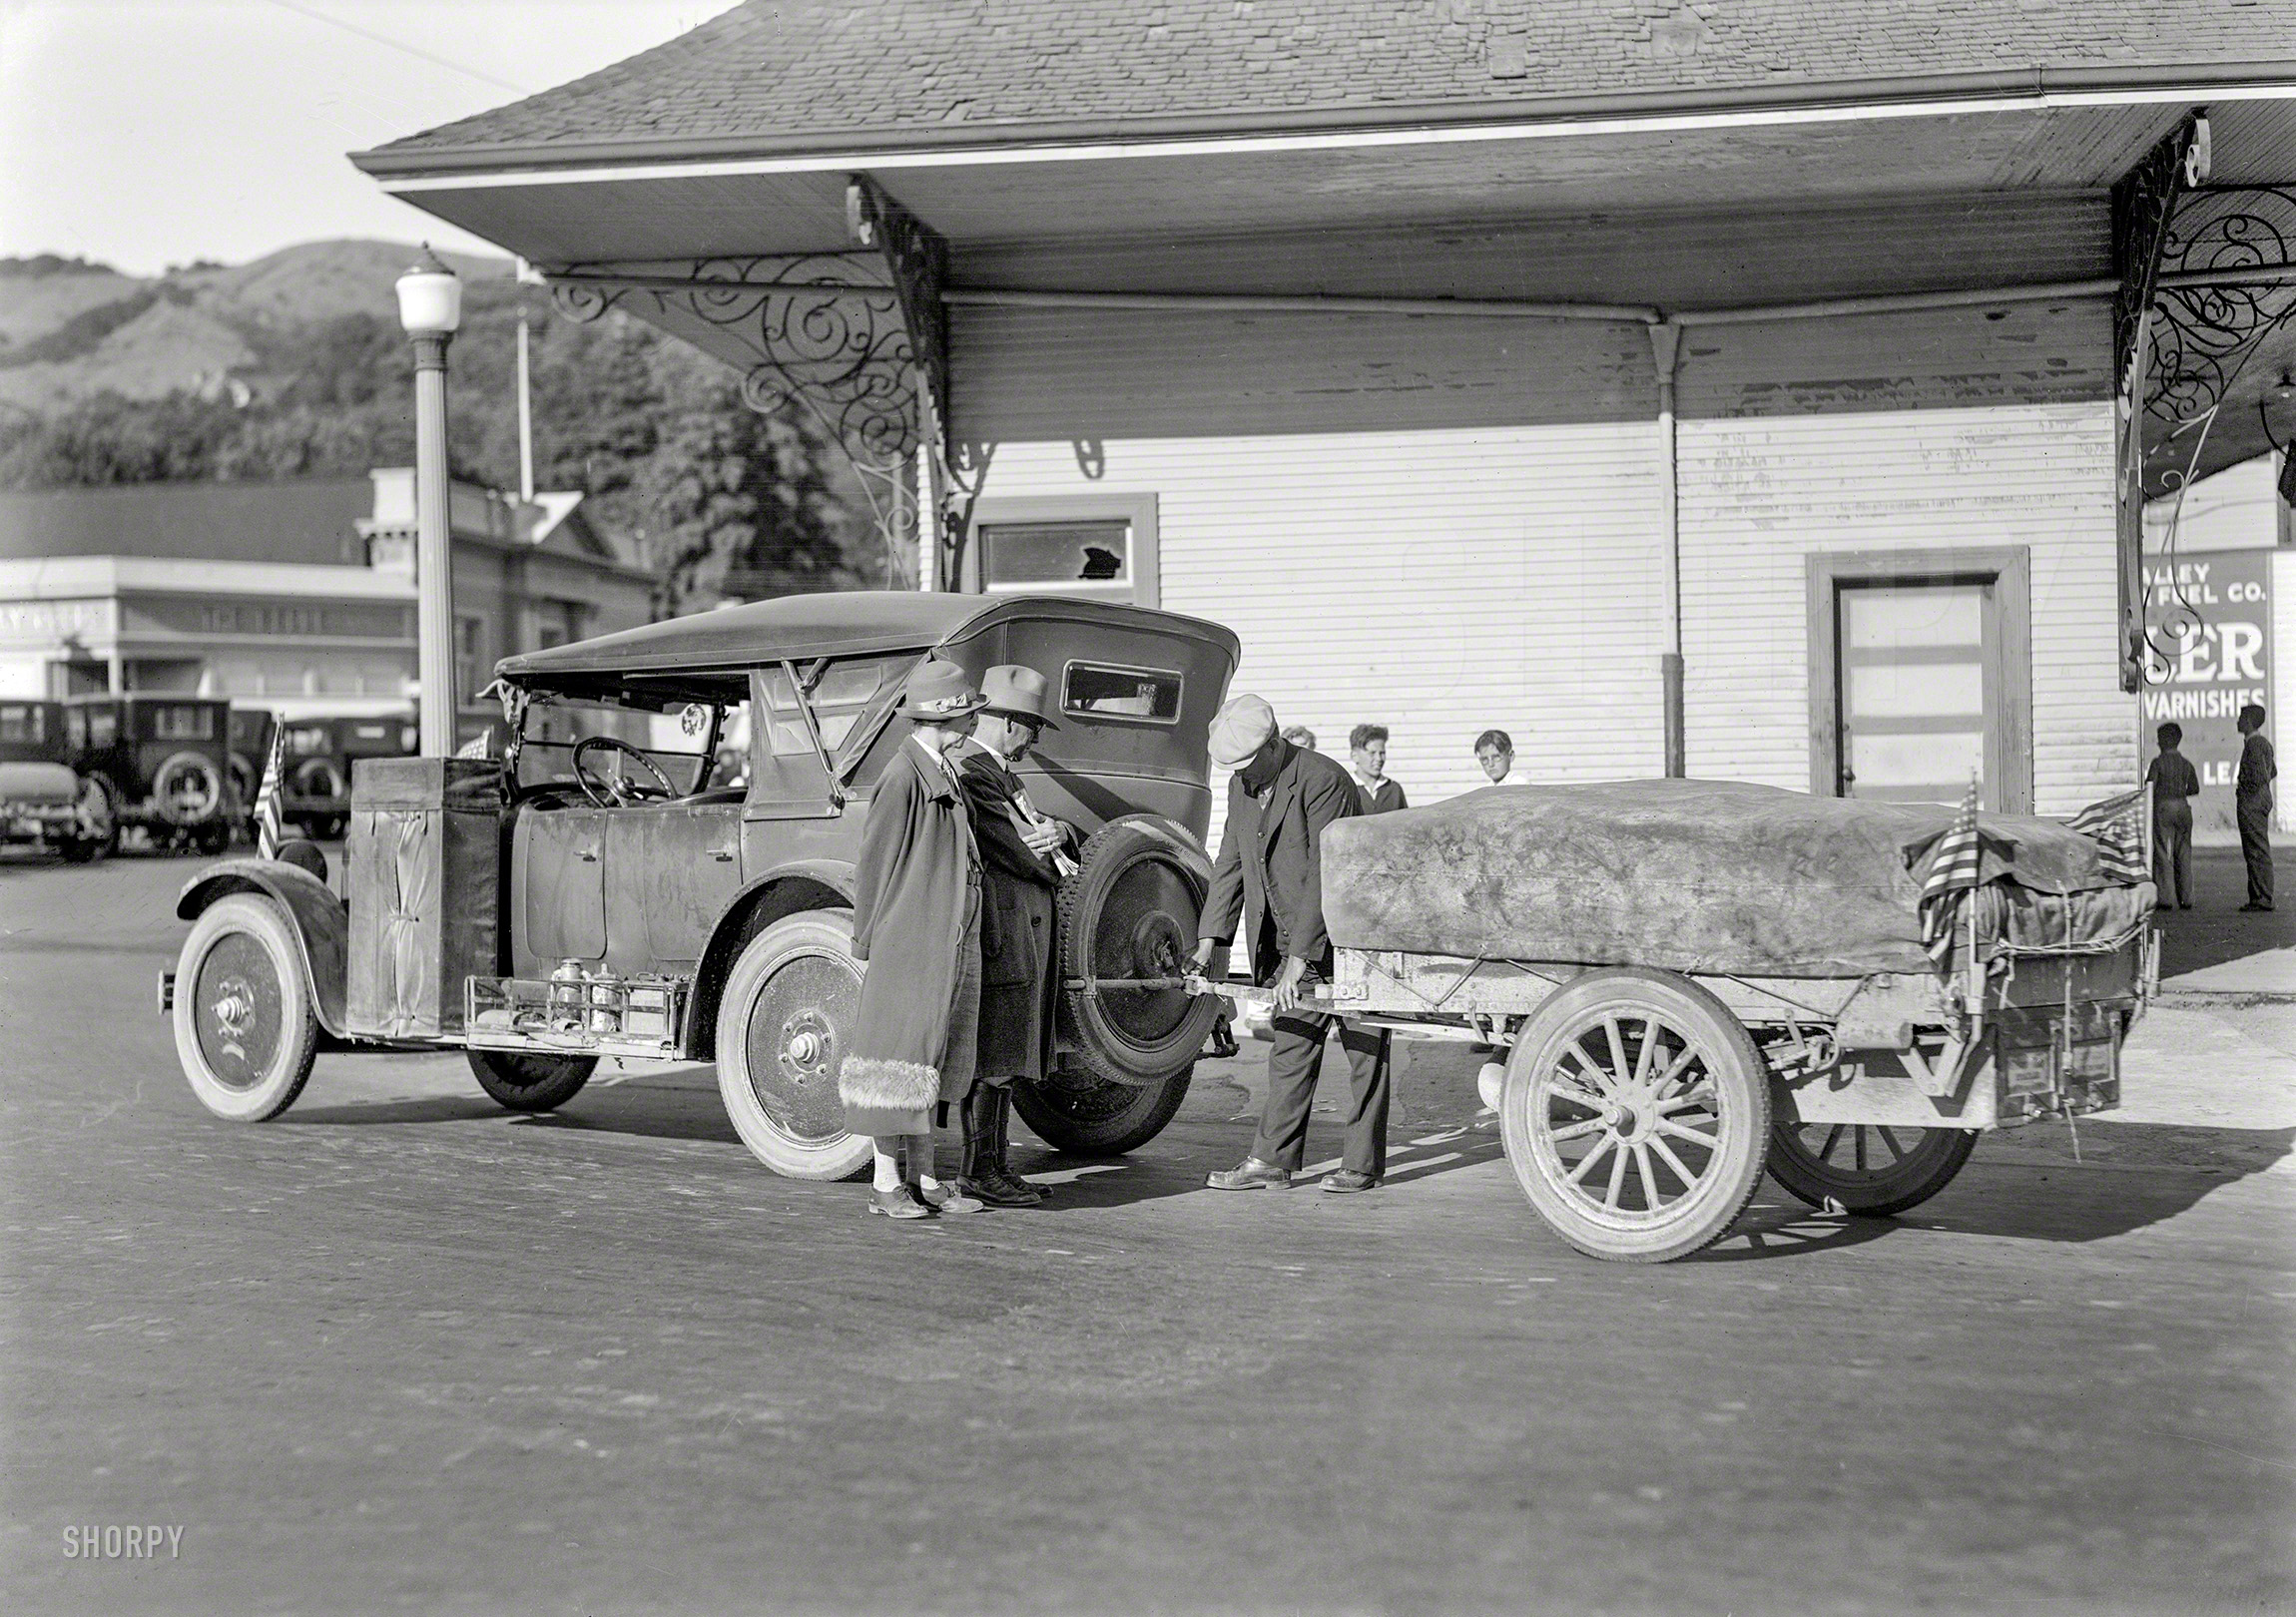 Mill Valley, Calif., circa 1925. "Nash touring car with trailer." Outfitted with a patriotic profusion of flags. 5x7 glassneg by Christopher Helin. View full size.